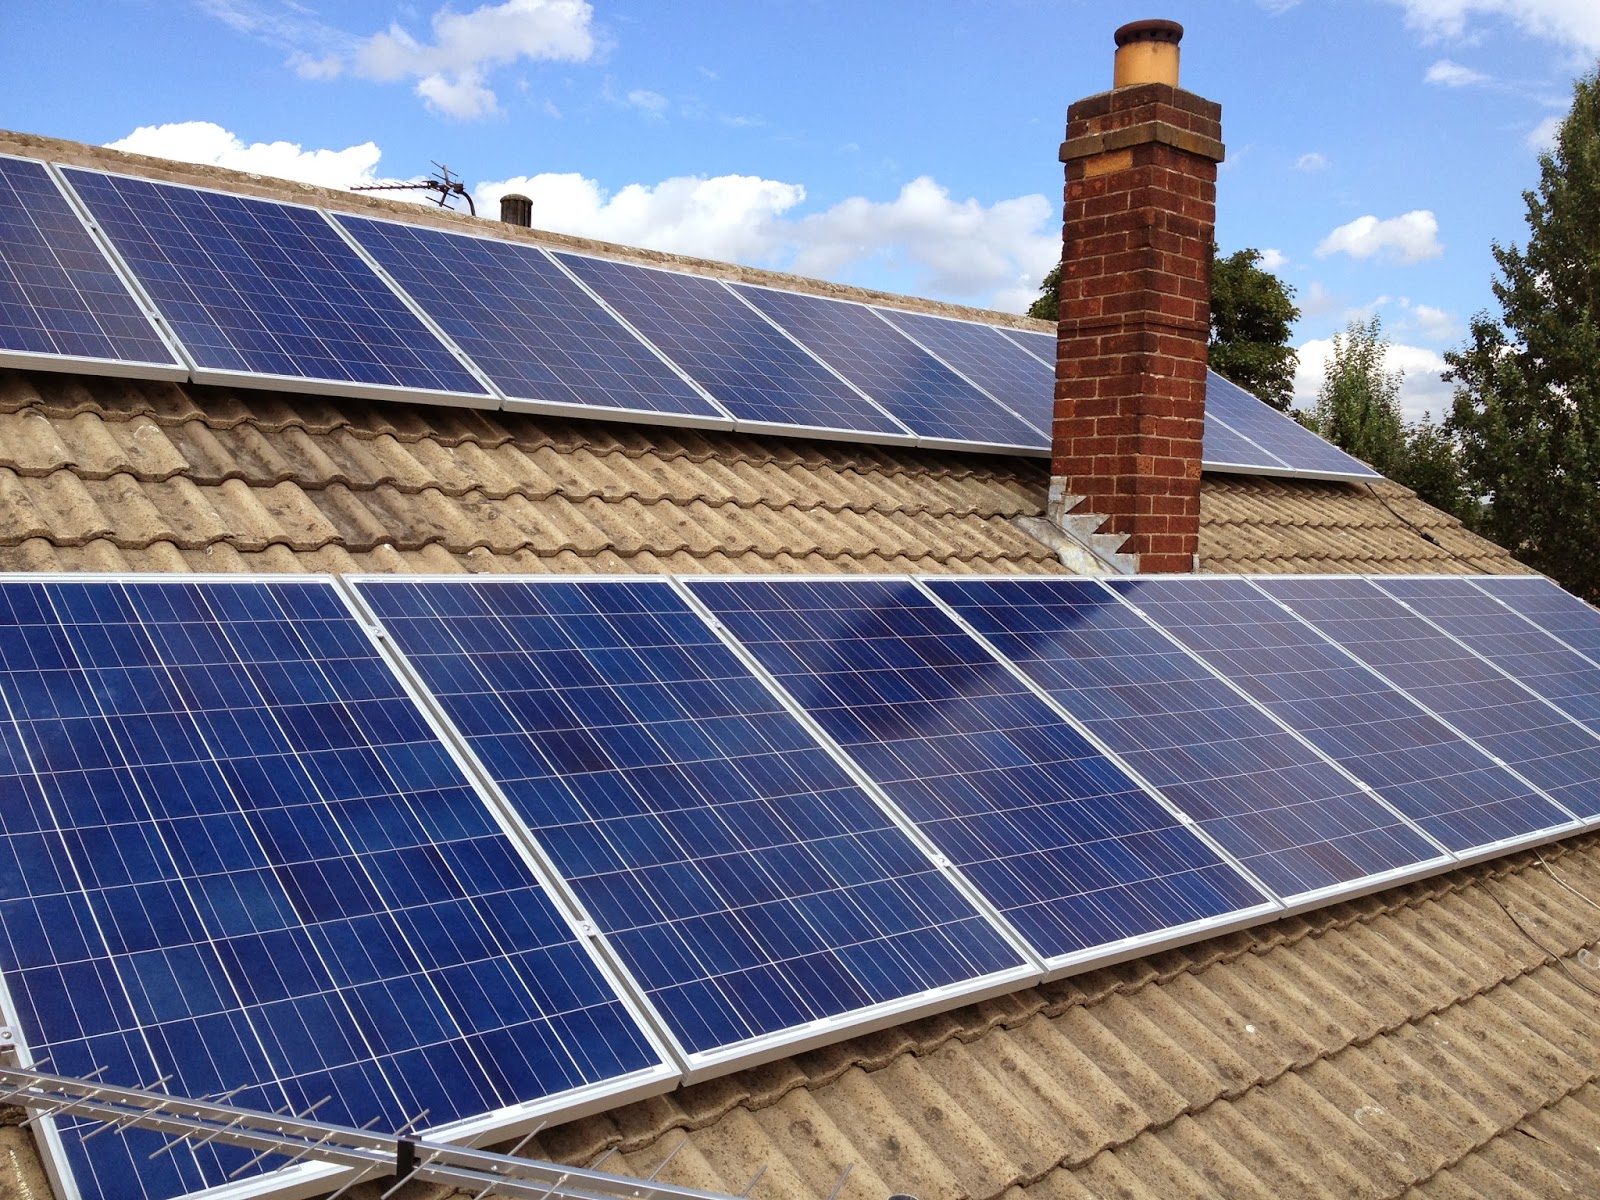 Jb Electrical and Solar Panels Mansfield Nottingham Solar Panel System installed in Rotherham